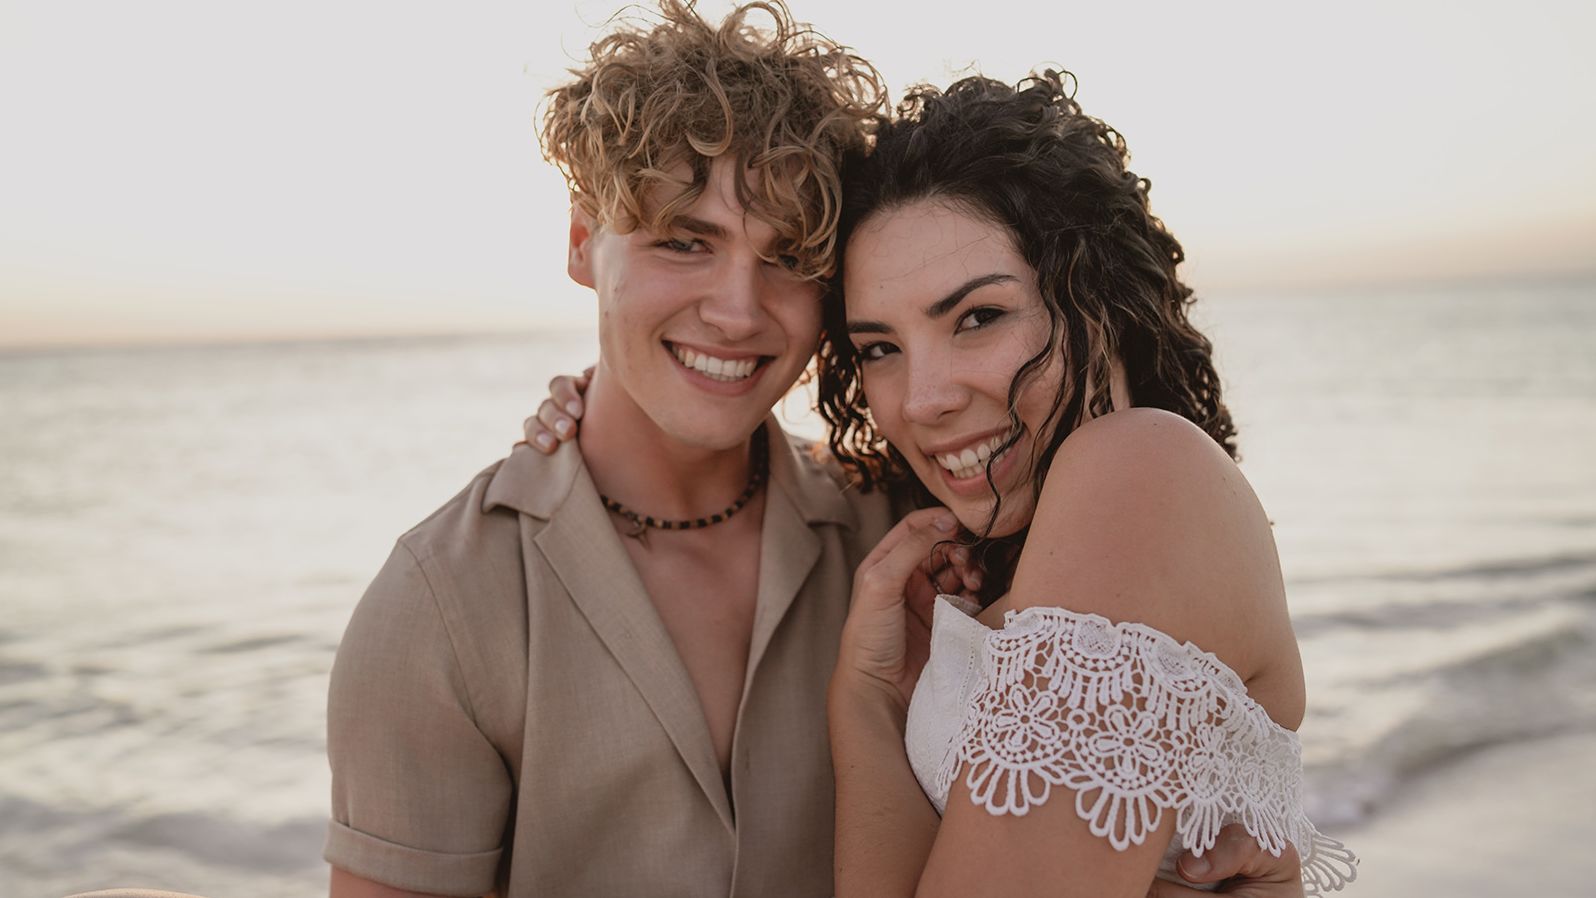 Lewis Kelly and Andrea Camila met on vacation when they were teenagers.